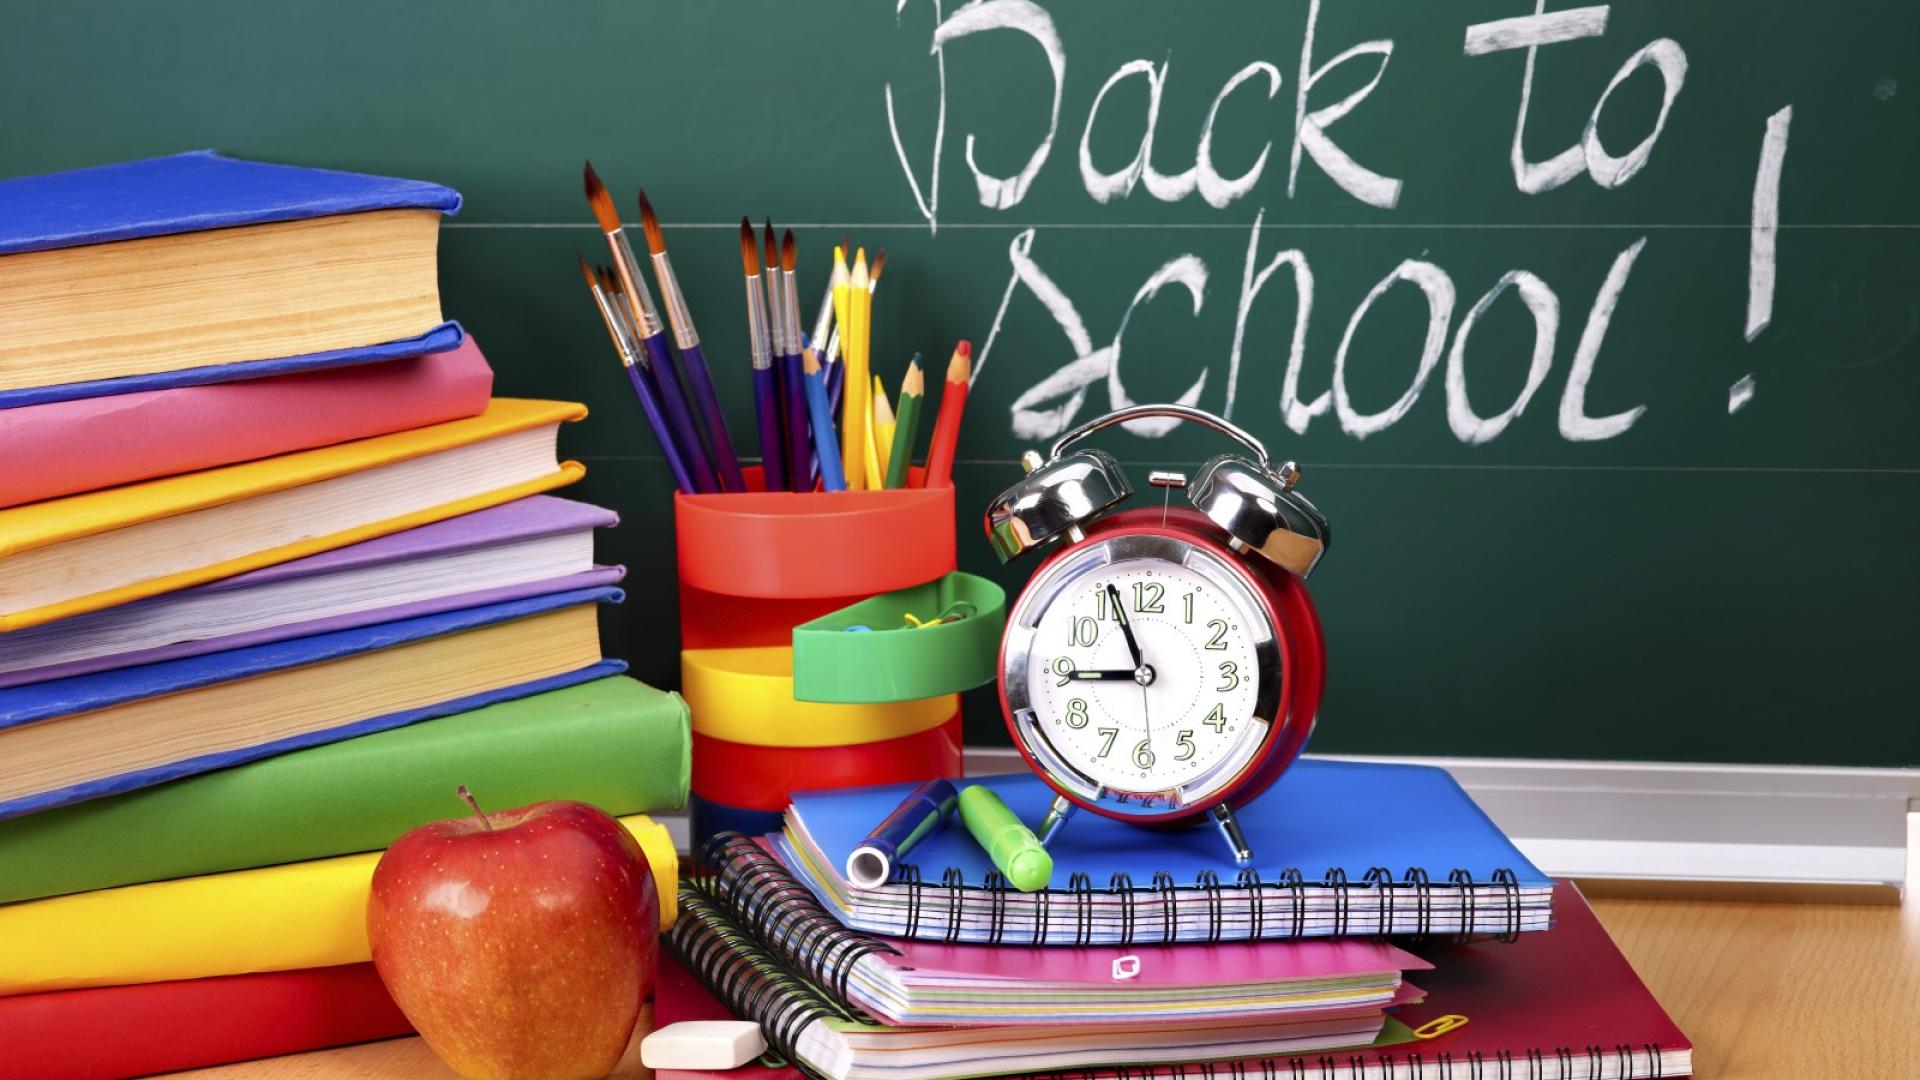 Back to School Wallpapers   Top Back to School Backgrounds 1920x1080